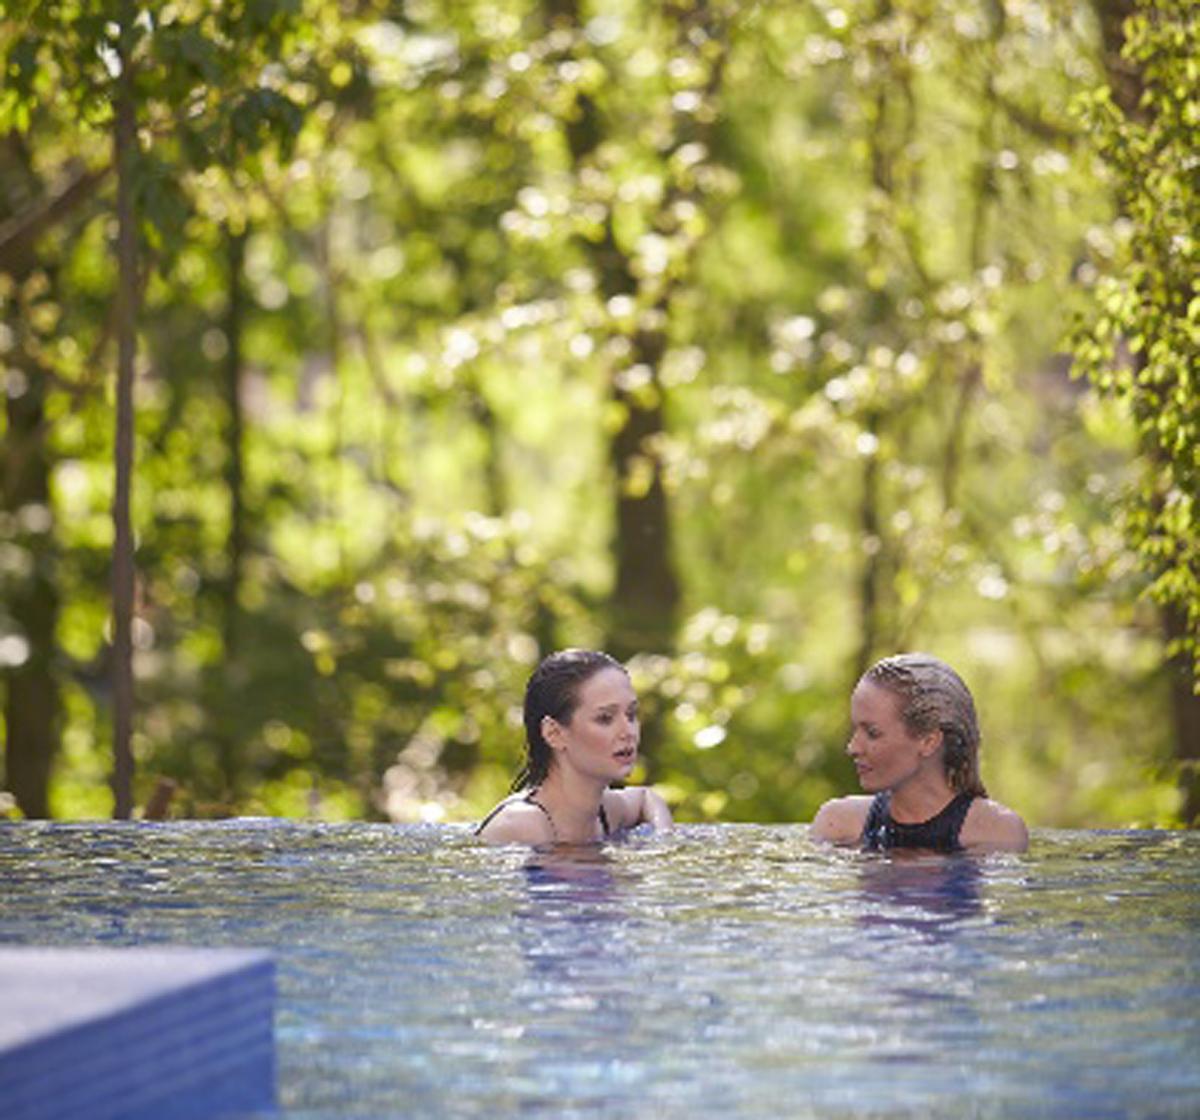 Sherwood Forest’s new forest spa experiences will include open air walkways, outdoor relaxation areas submerged in the forest, and a treetop sauna that offers panoramic views over the forest canopy / 